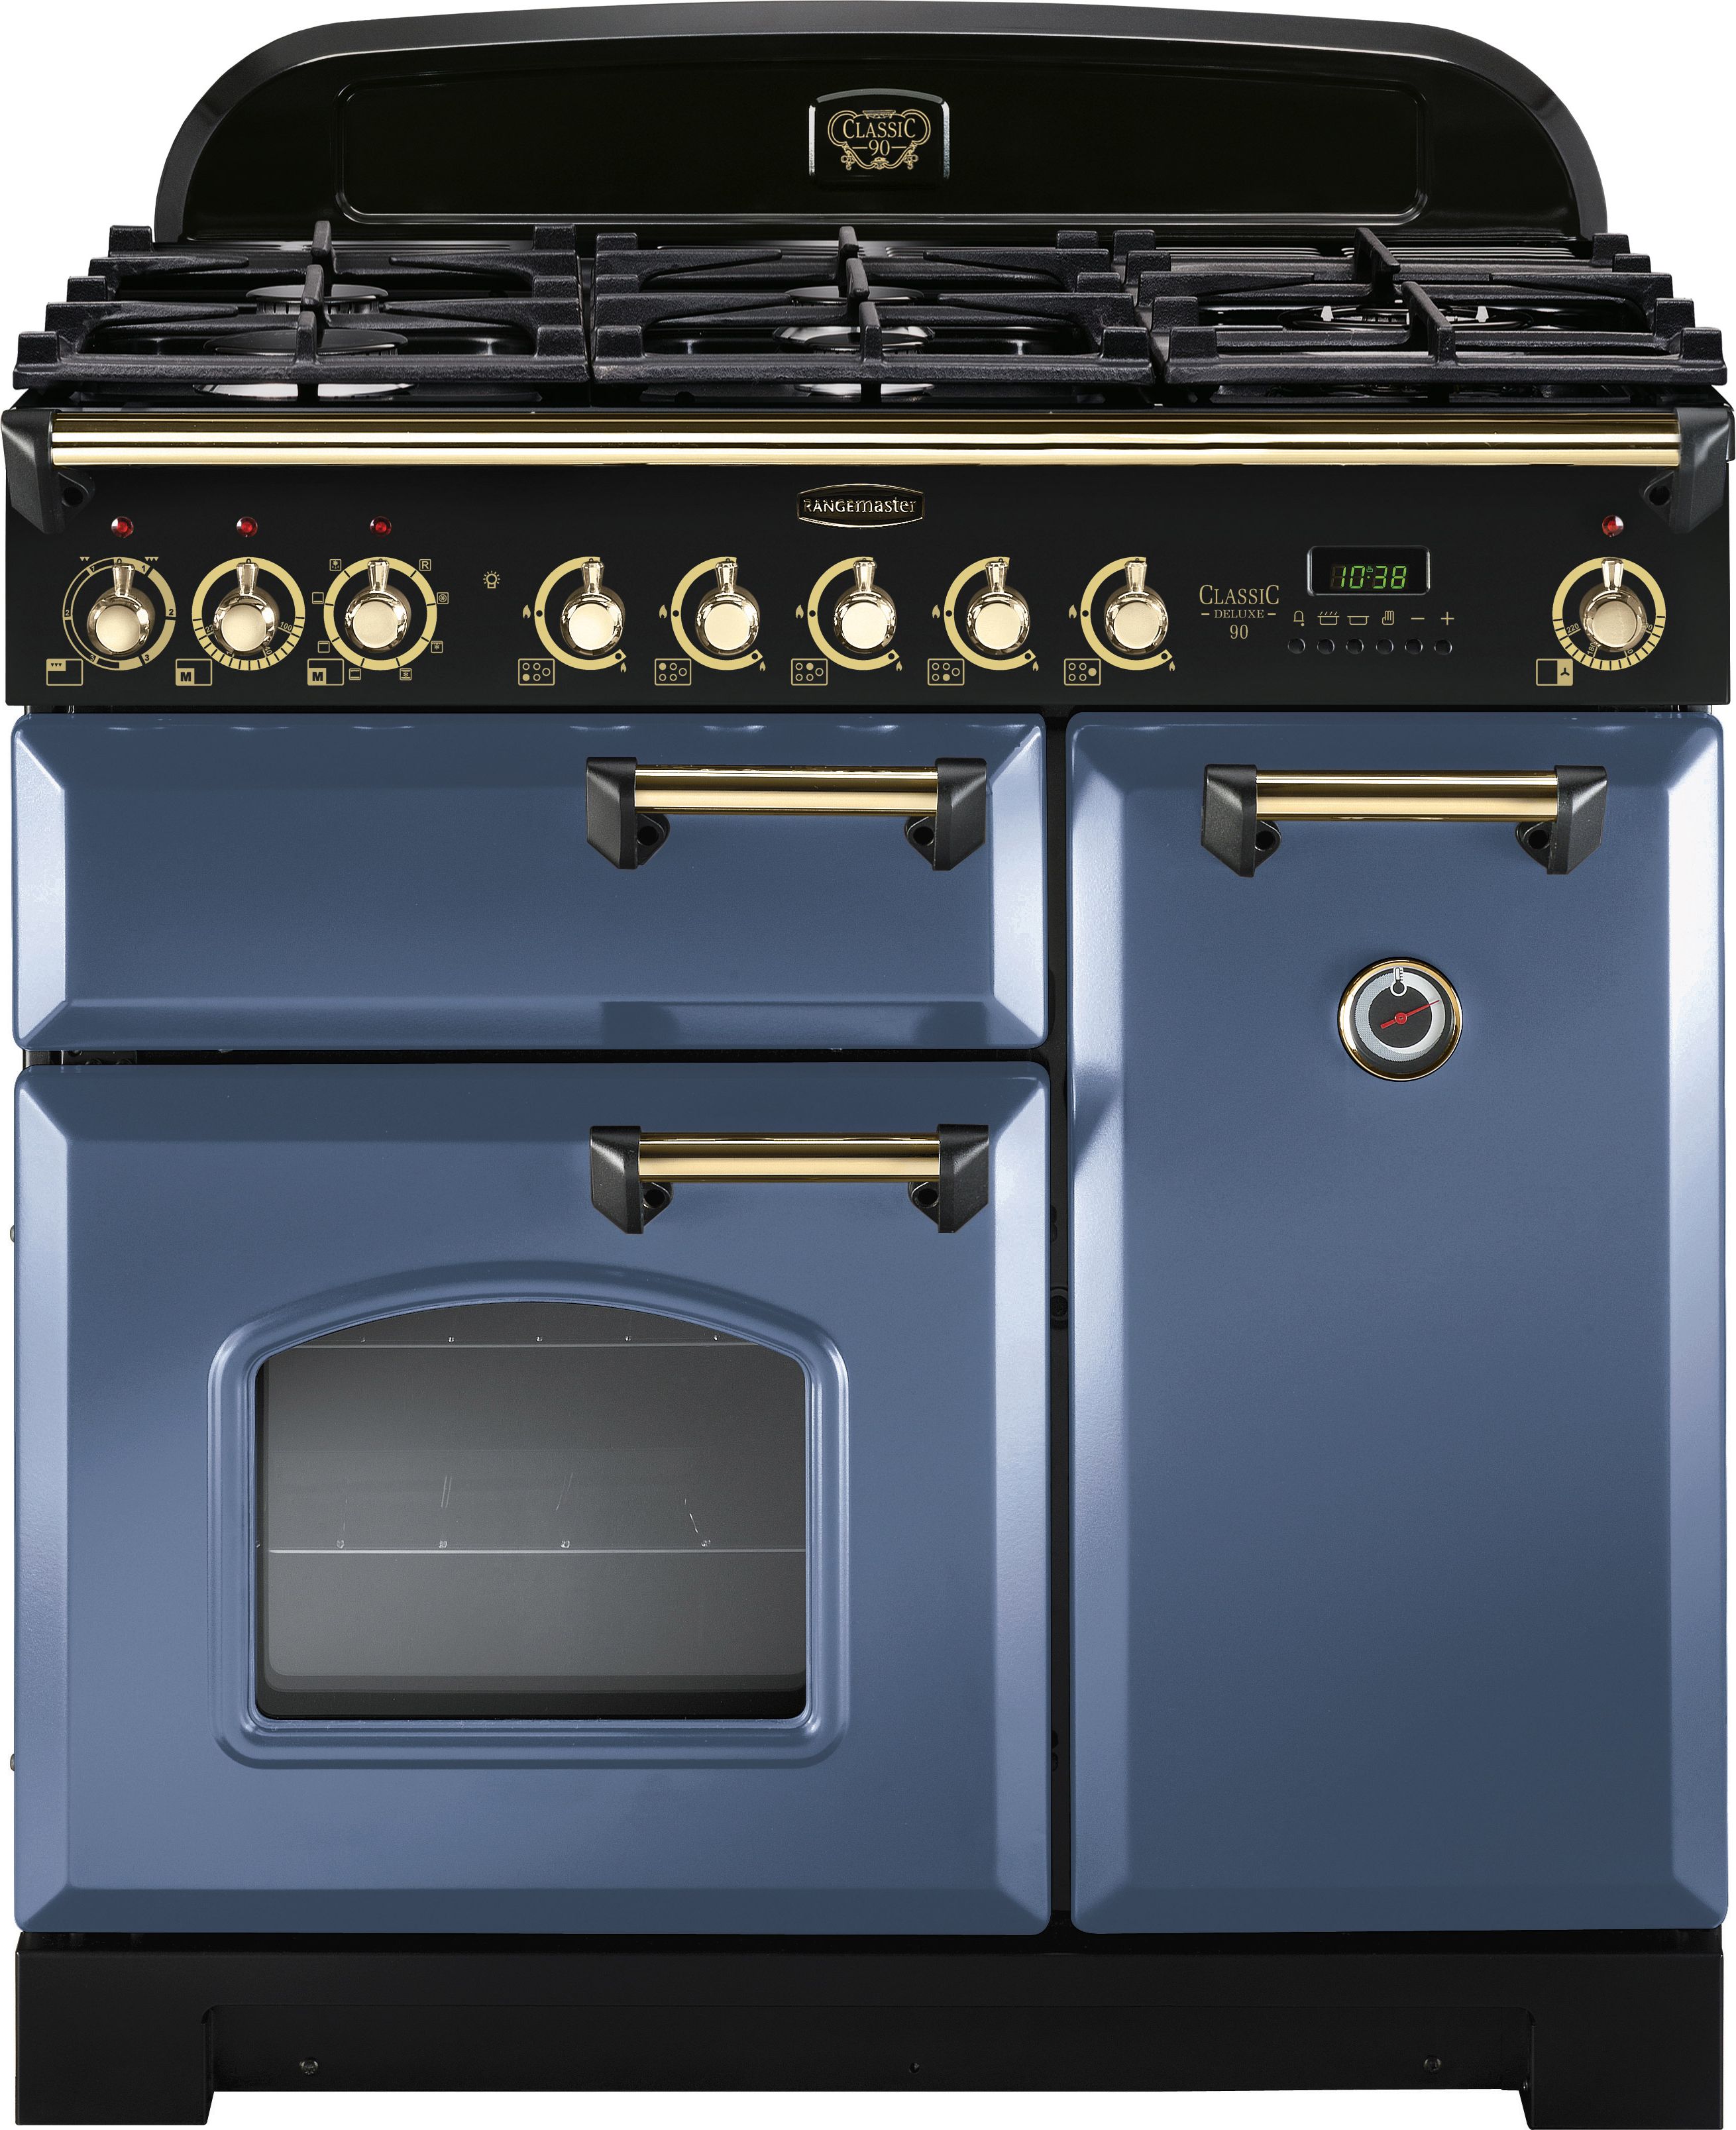 Rangemaster Classic Deluxe CDL90DFFSB/B 90cm Dual Fuel Range Cooker - Stone Blue / Brass - A/A Rated, Blue